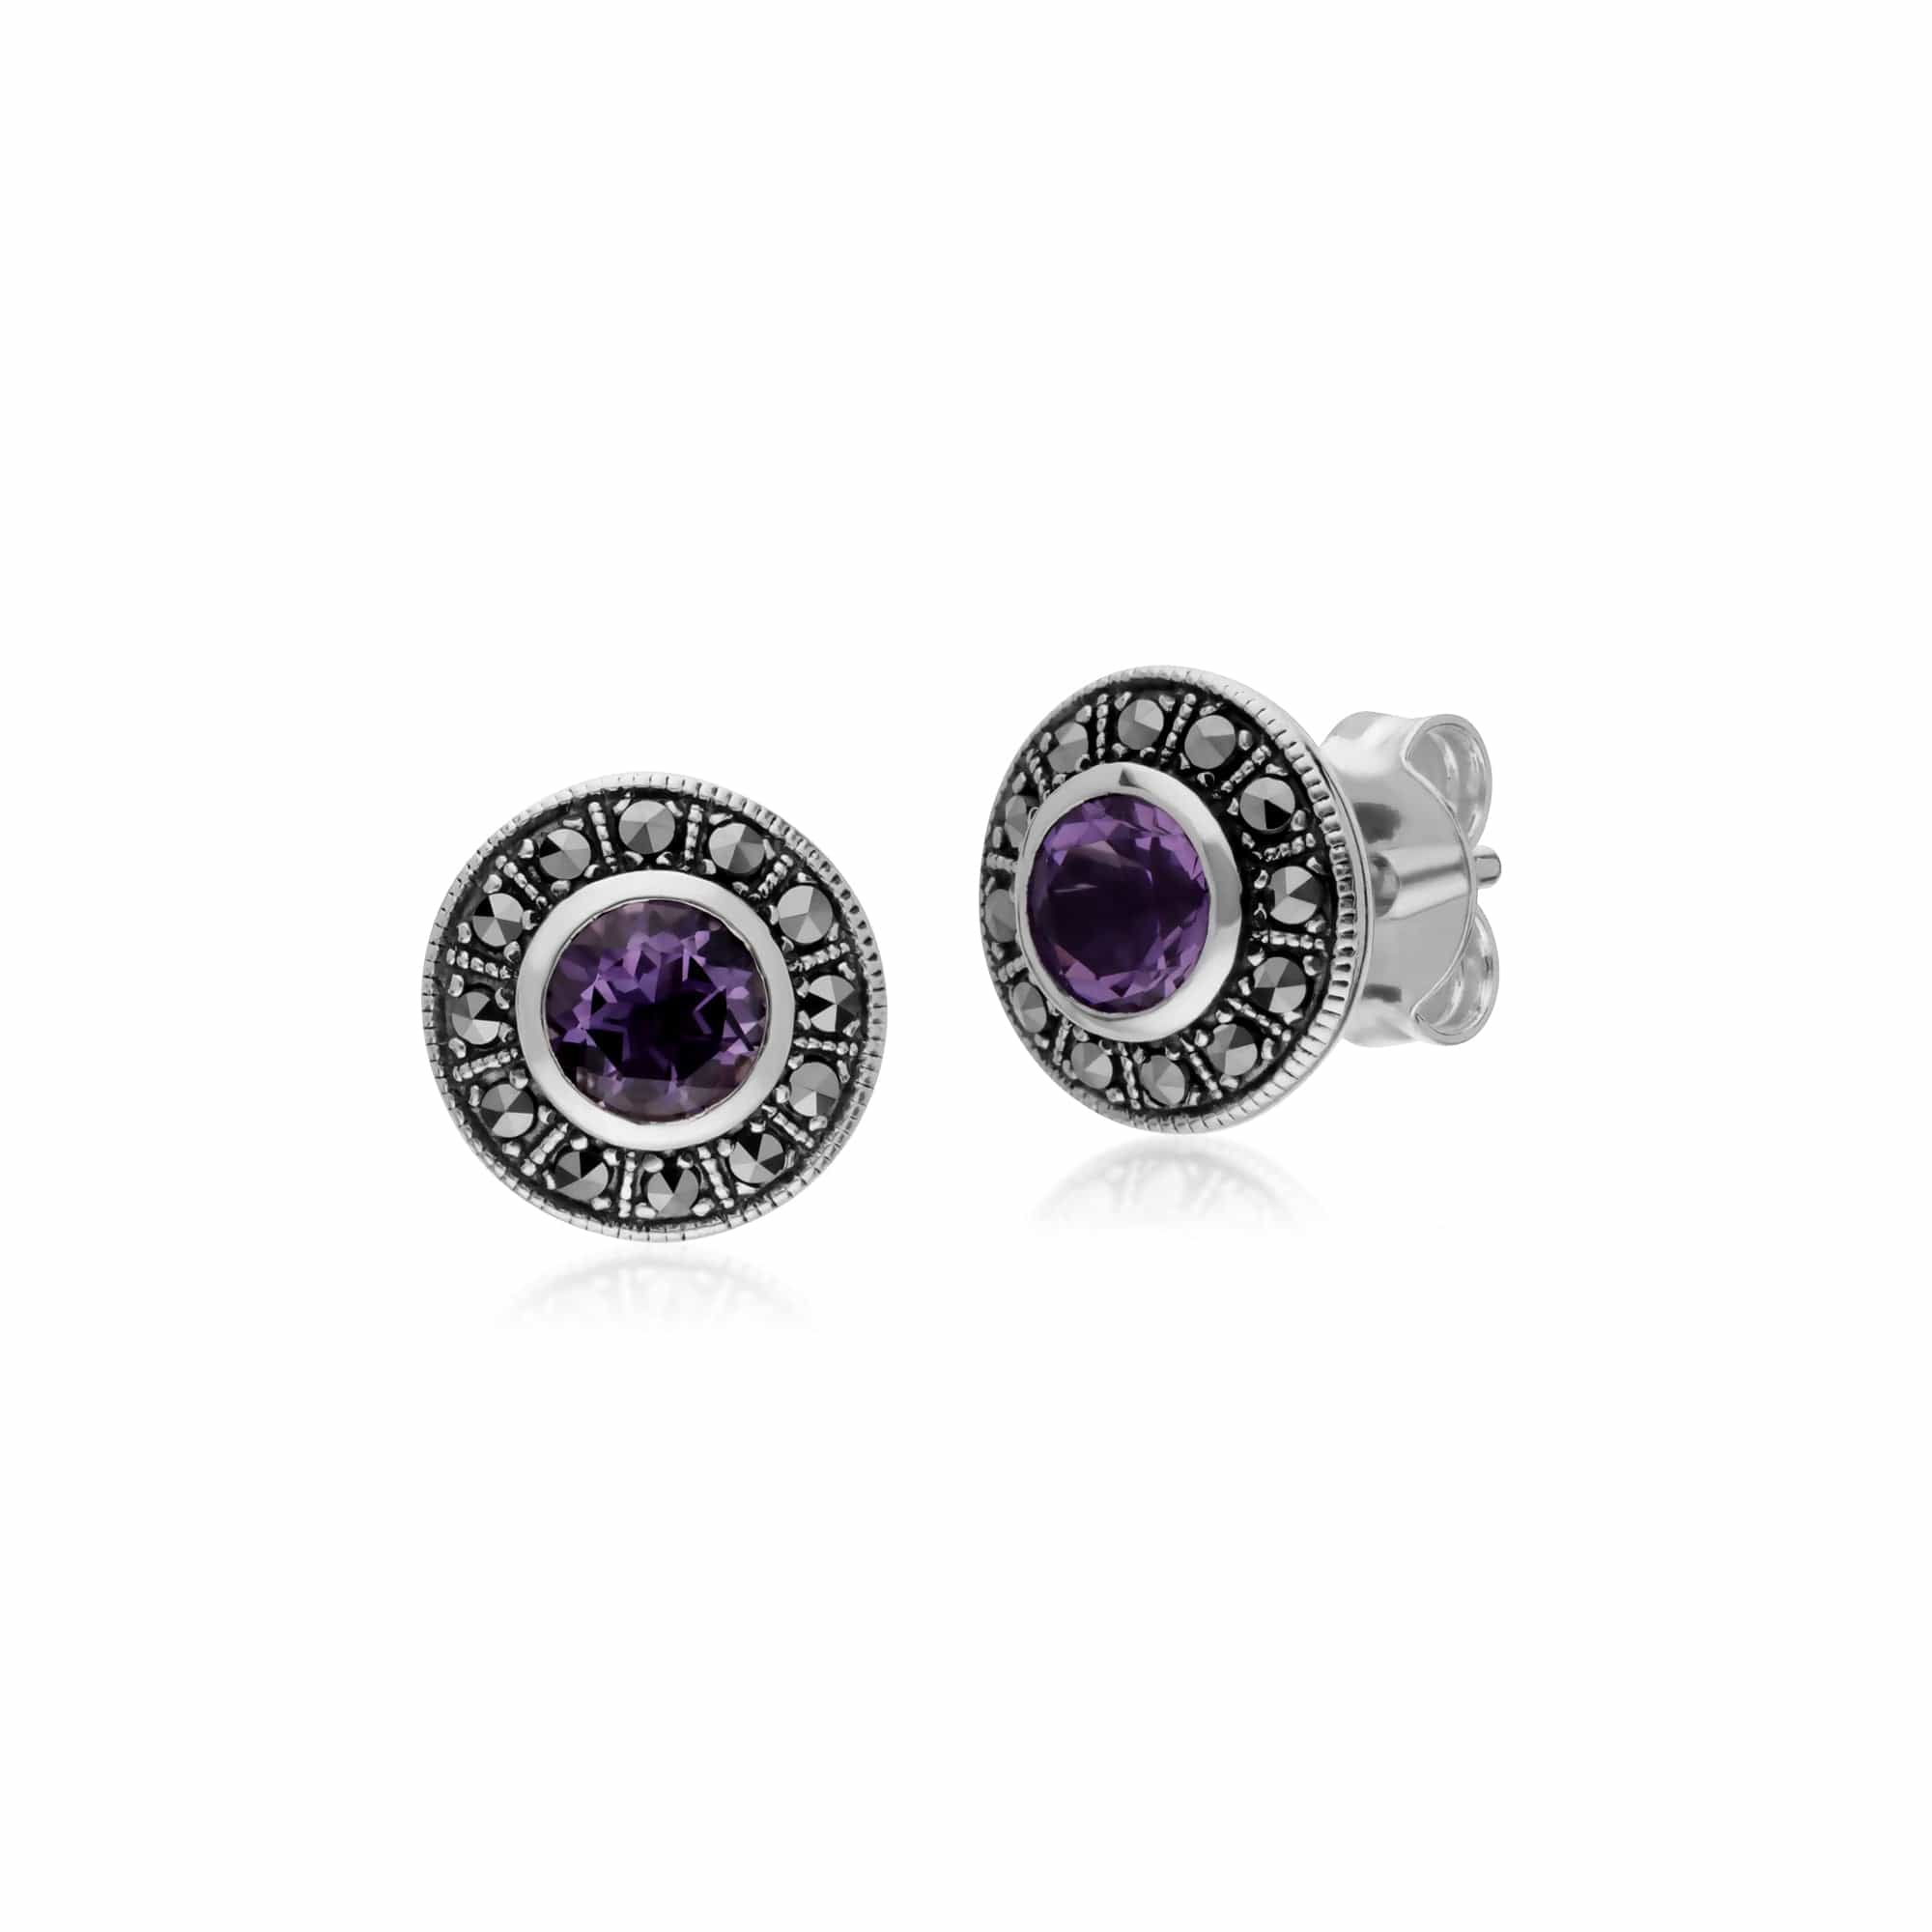 214E872701925 Gemondo Sterling Silver Round Amethyst and Marcasite Cluster Stud Earrings 1